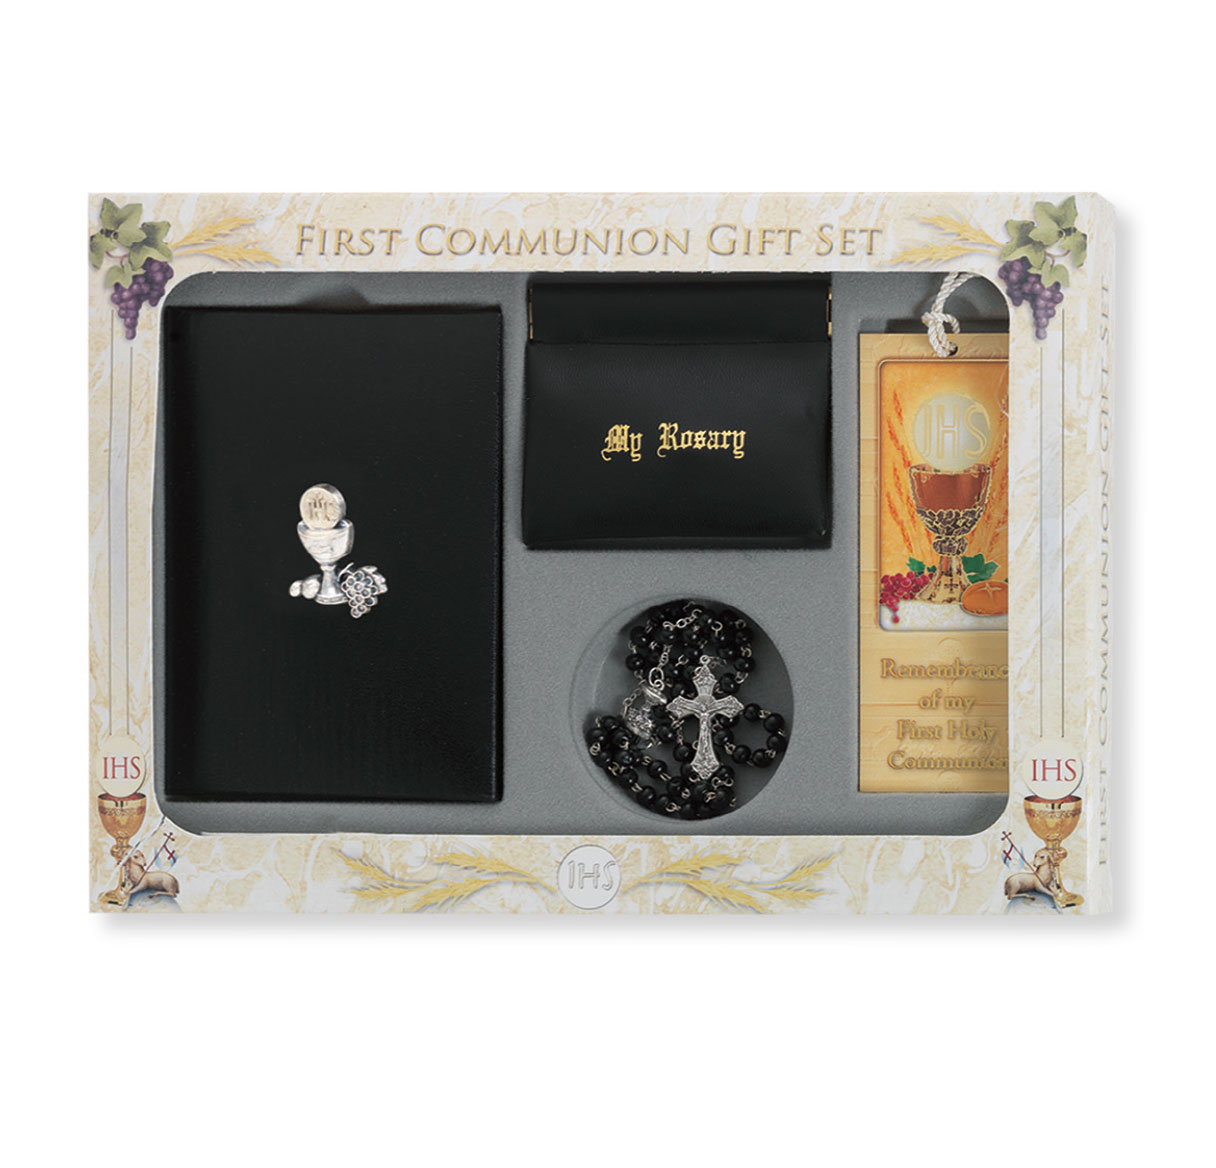 First Communion Gift Set 6 pc Black Blessed Trinity Missal